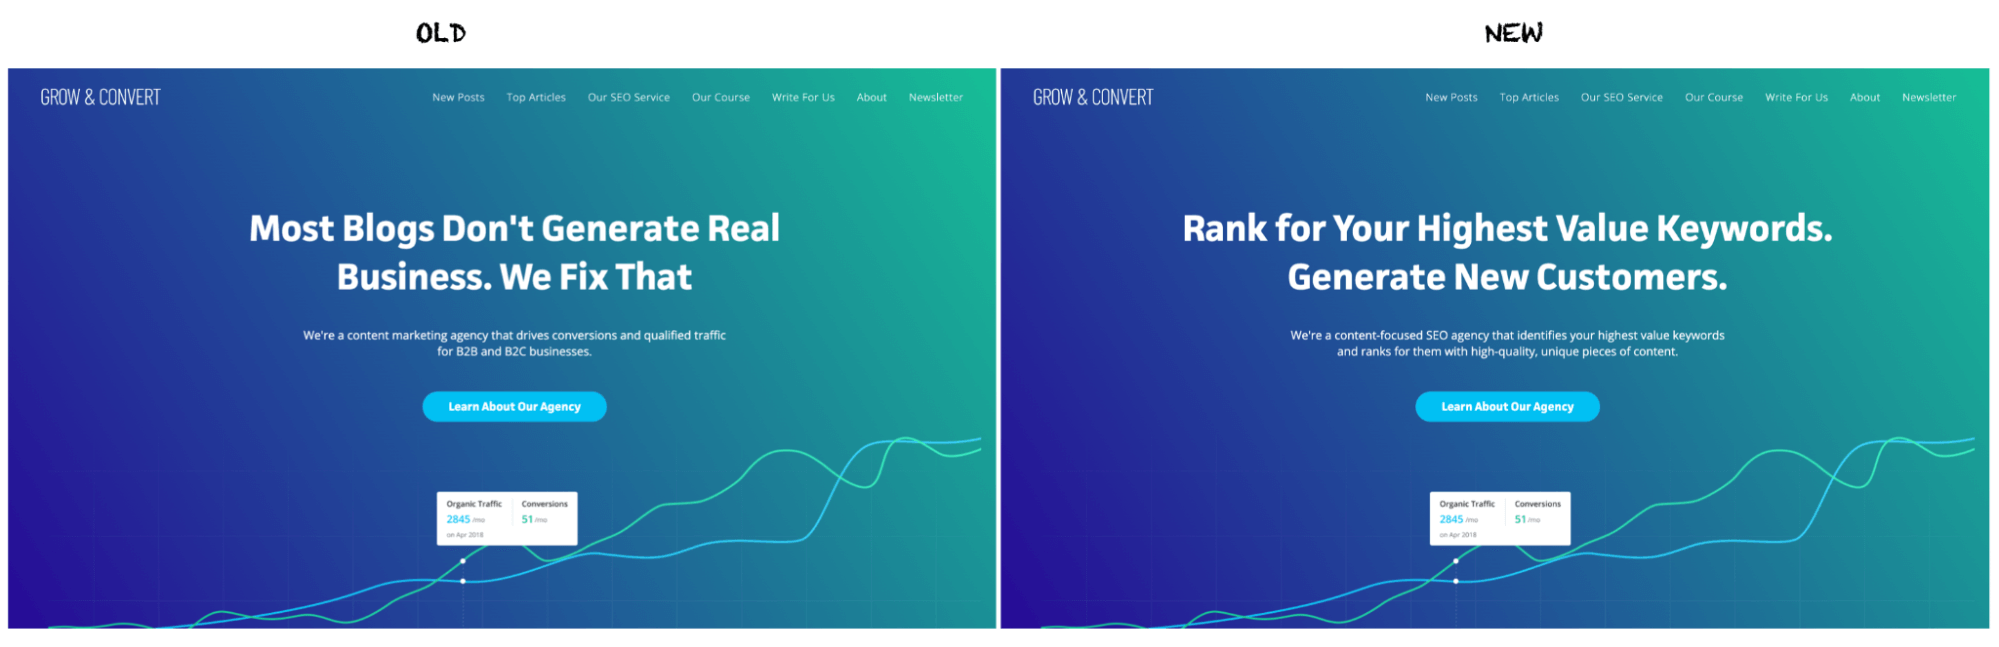 Old vs New Homepage Headline Positioning for Grow and Convert: Rank for Your Highest Value Keywords. Generate New Customers.